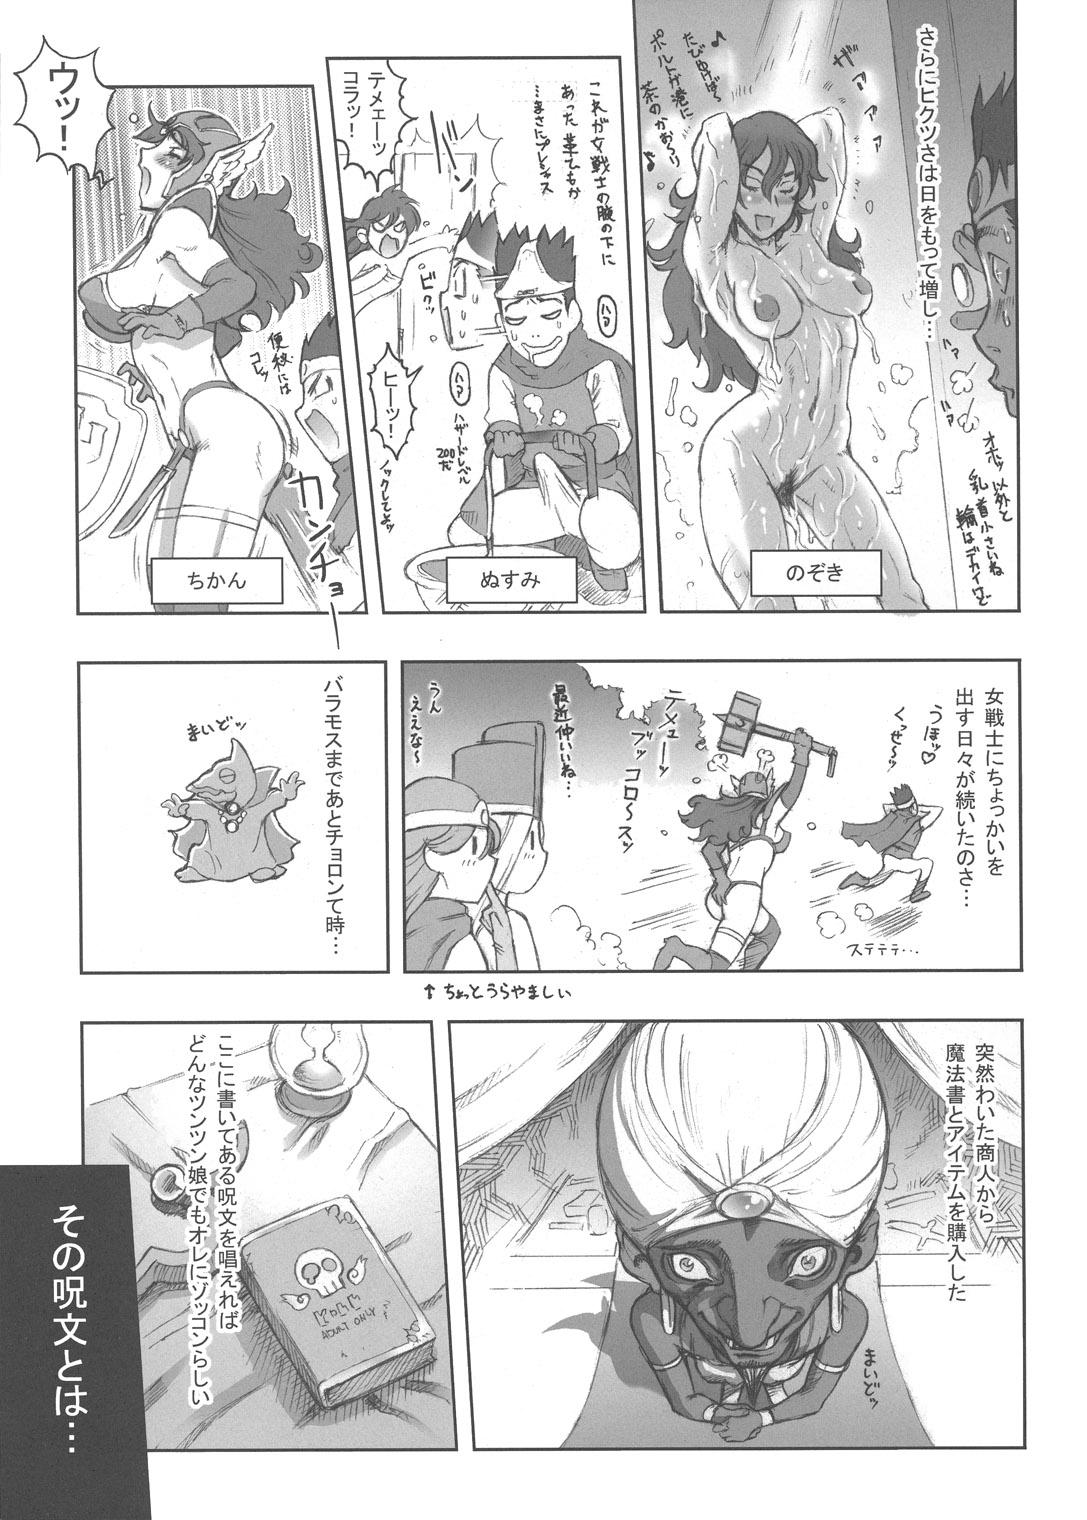 Forwomen Nippon Onna Heroine 3 - Sailor moon Dragon quest iii Fuck My Pussy - Page 6